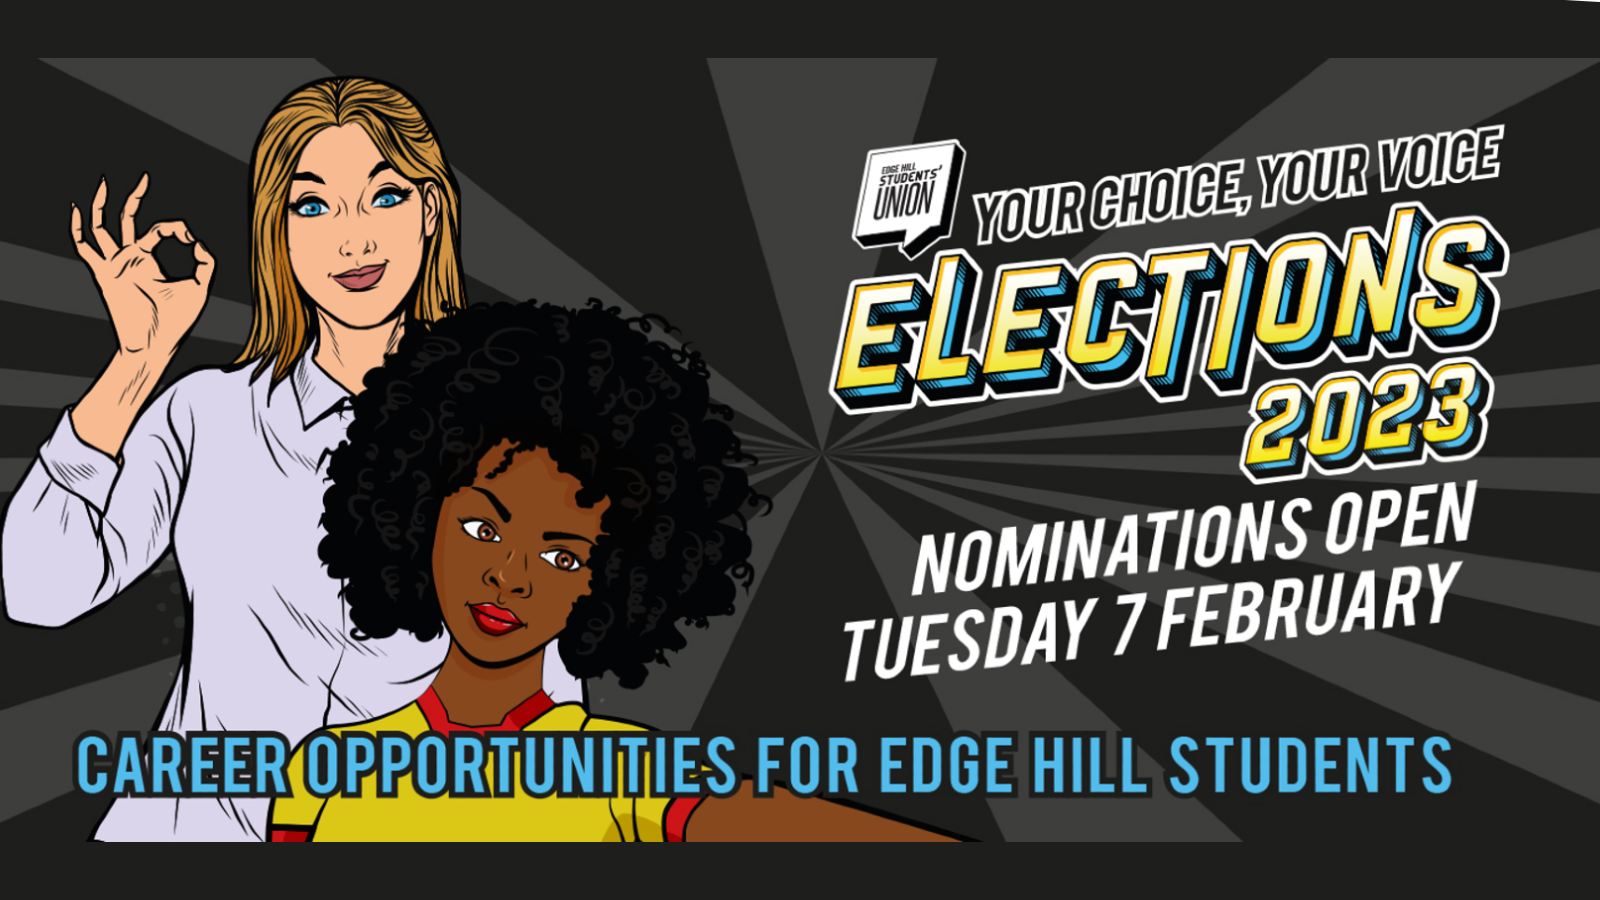 SU elections graphic. The text reads 'Your choice, your voice. Elections 2023. Nominations open Tuesday 7 February. Careers opportunities for Edge Hill students.'